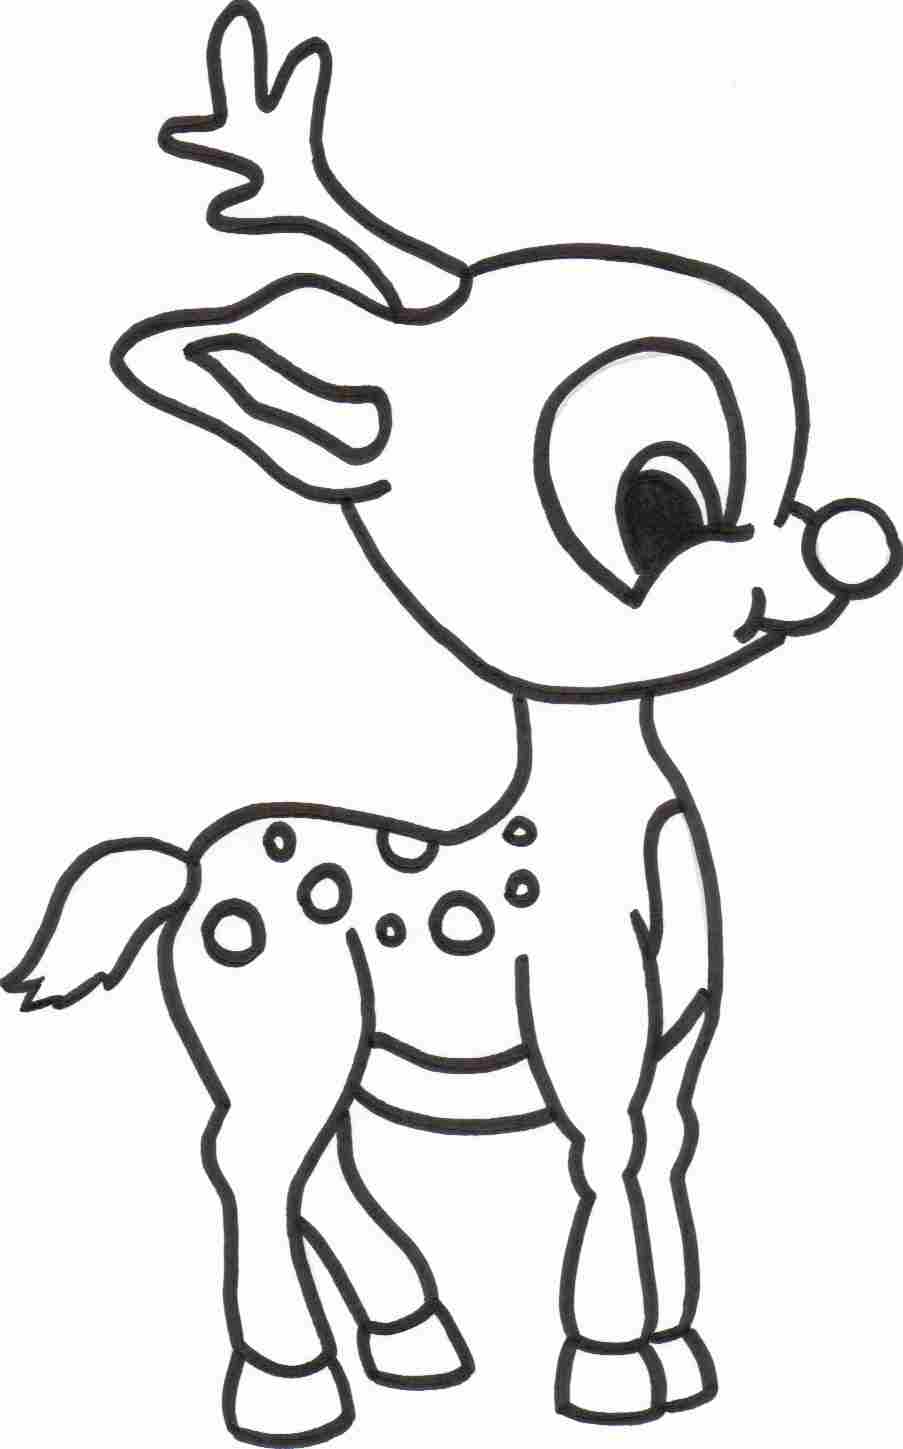 399 Cute Reindeer Coloring Pages For Kids Printable for Adult